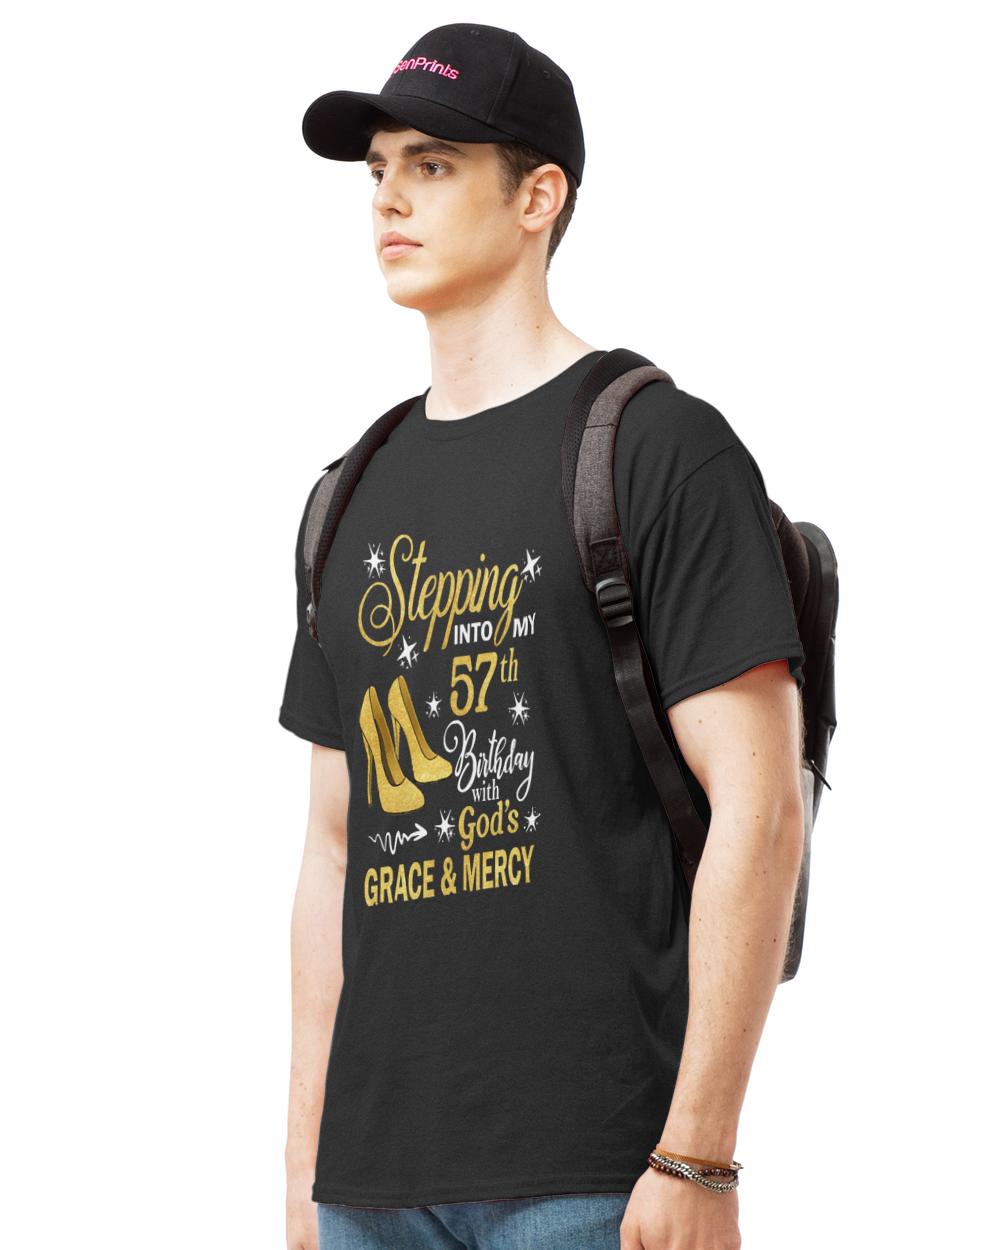 57th Birthday T-ShirtStepping Into My 57th Birthday With God's Grace & Mercy Bday T-Shirt (8)